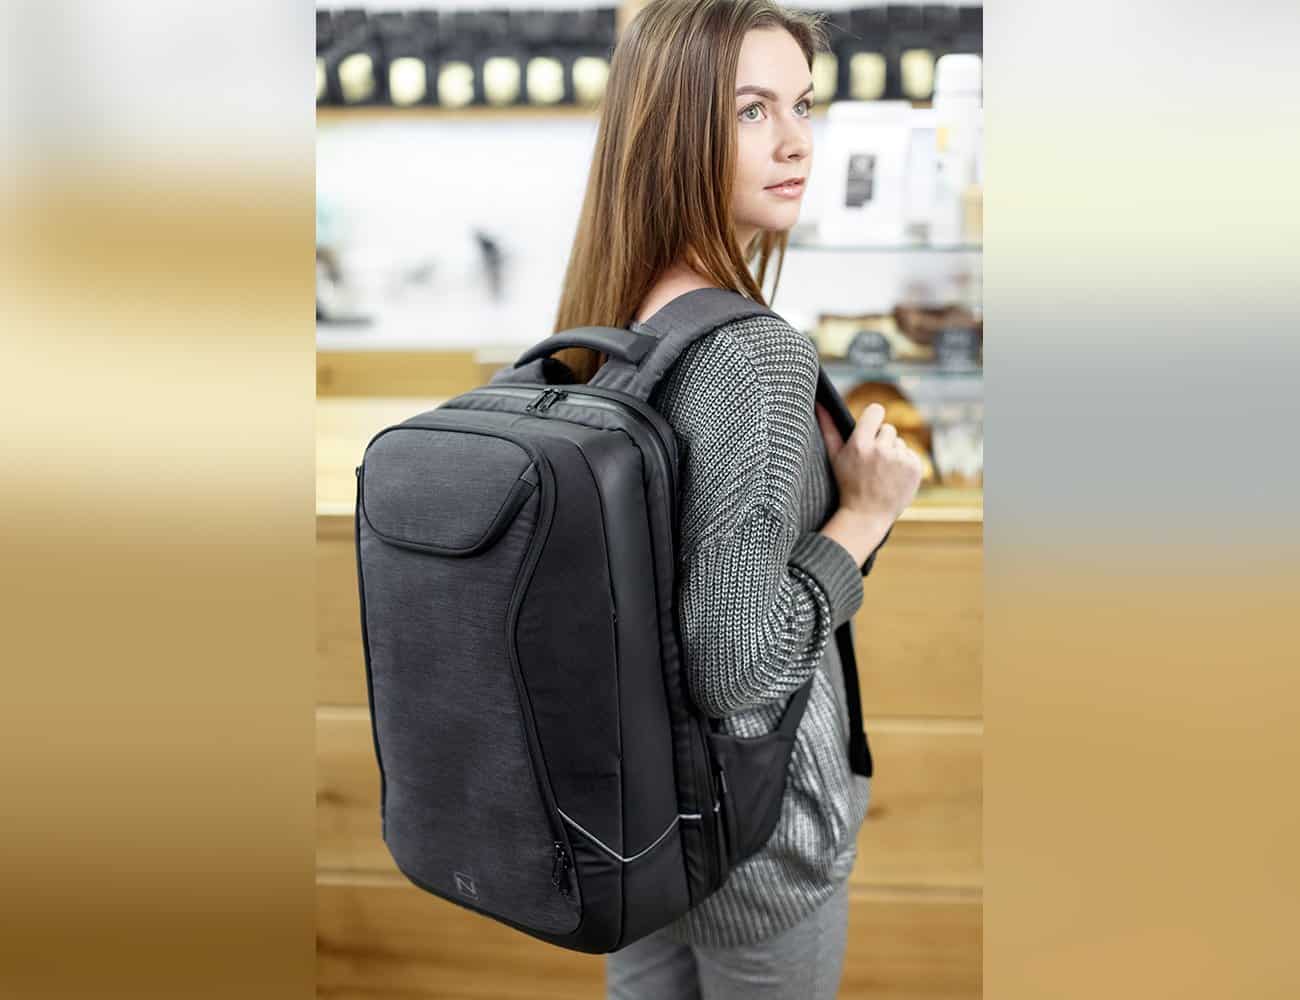 Meet Neweex - The Most Versatile, Multi-functional Backpack You'll Ever Need! - 5